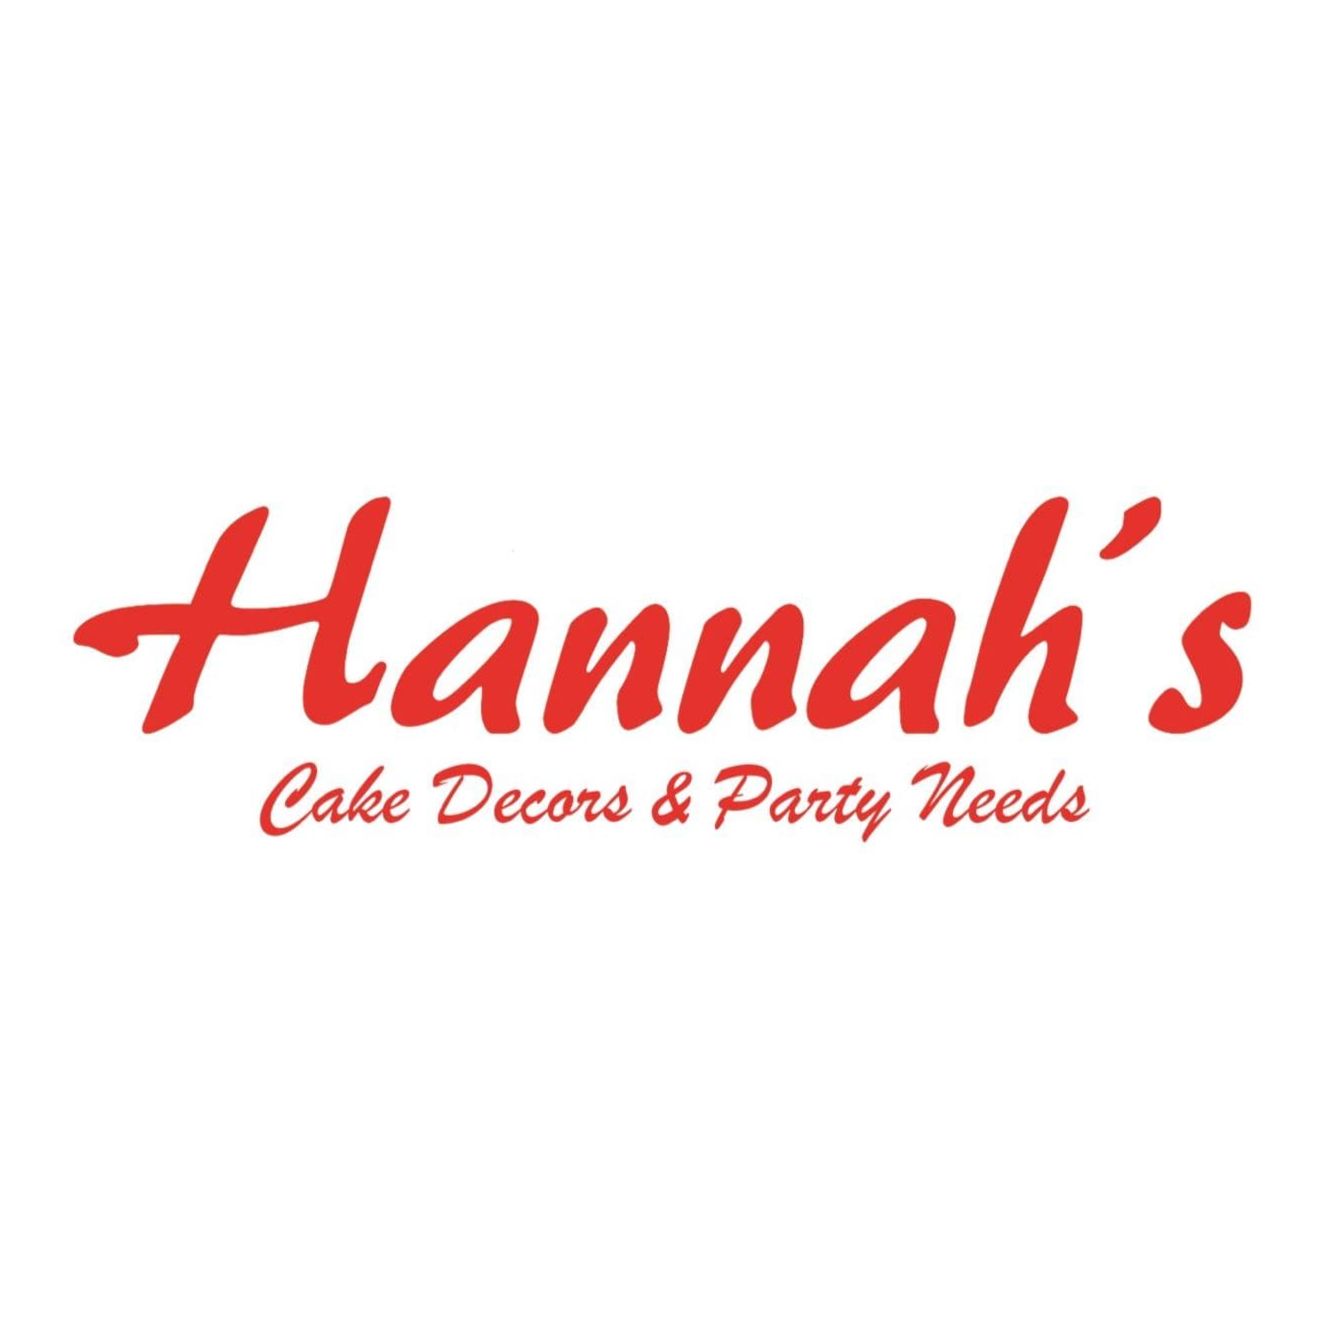 Hannah's Cake Decors & Party Needs Careers in Philippines, Job ...